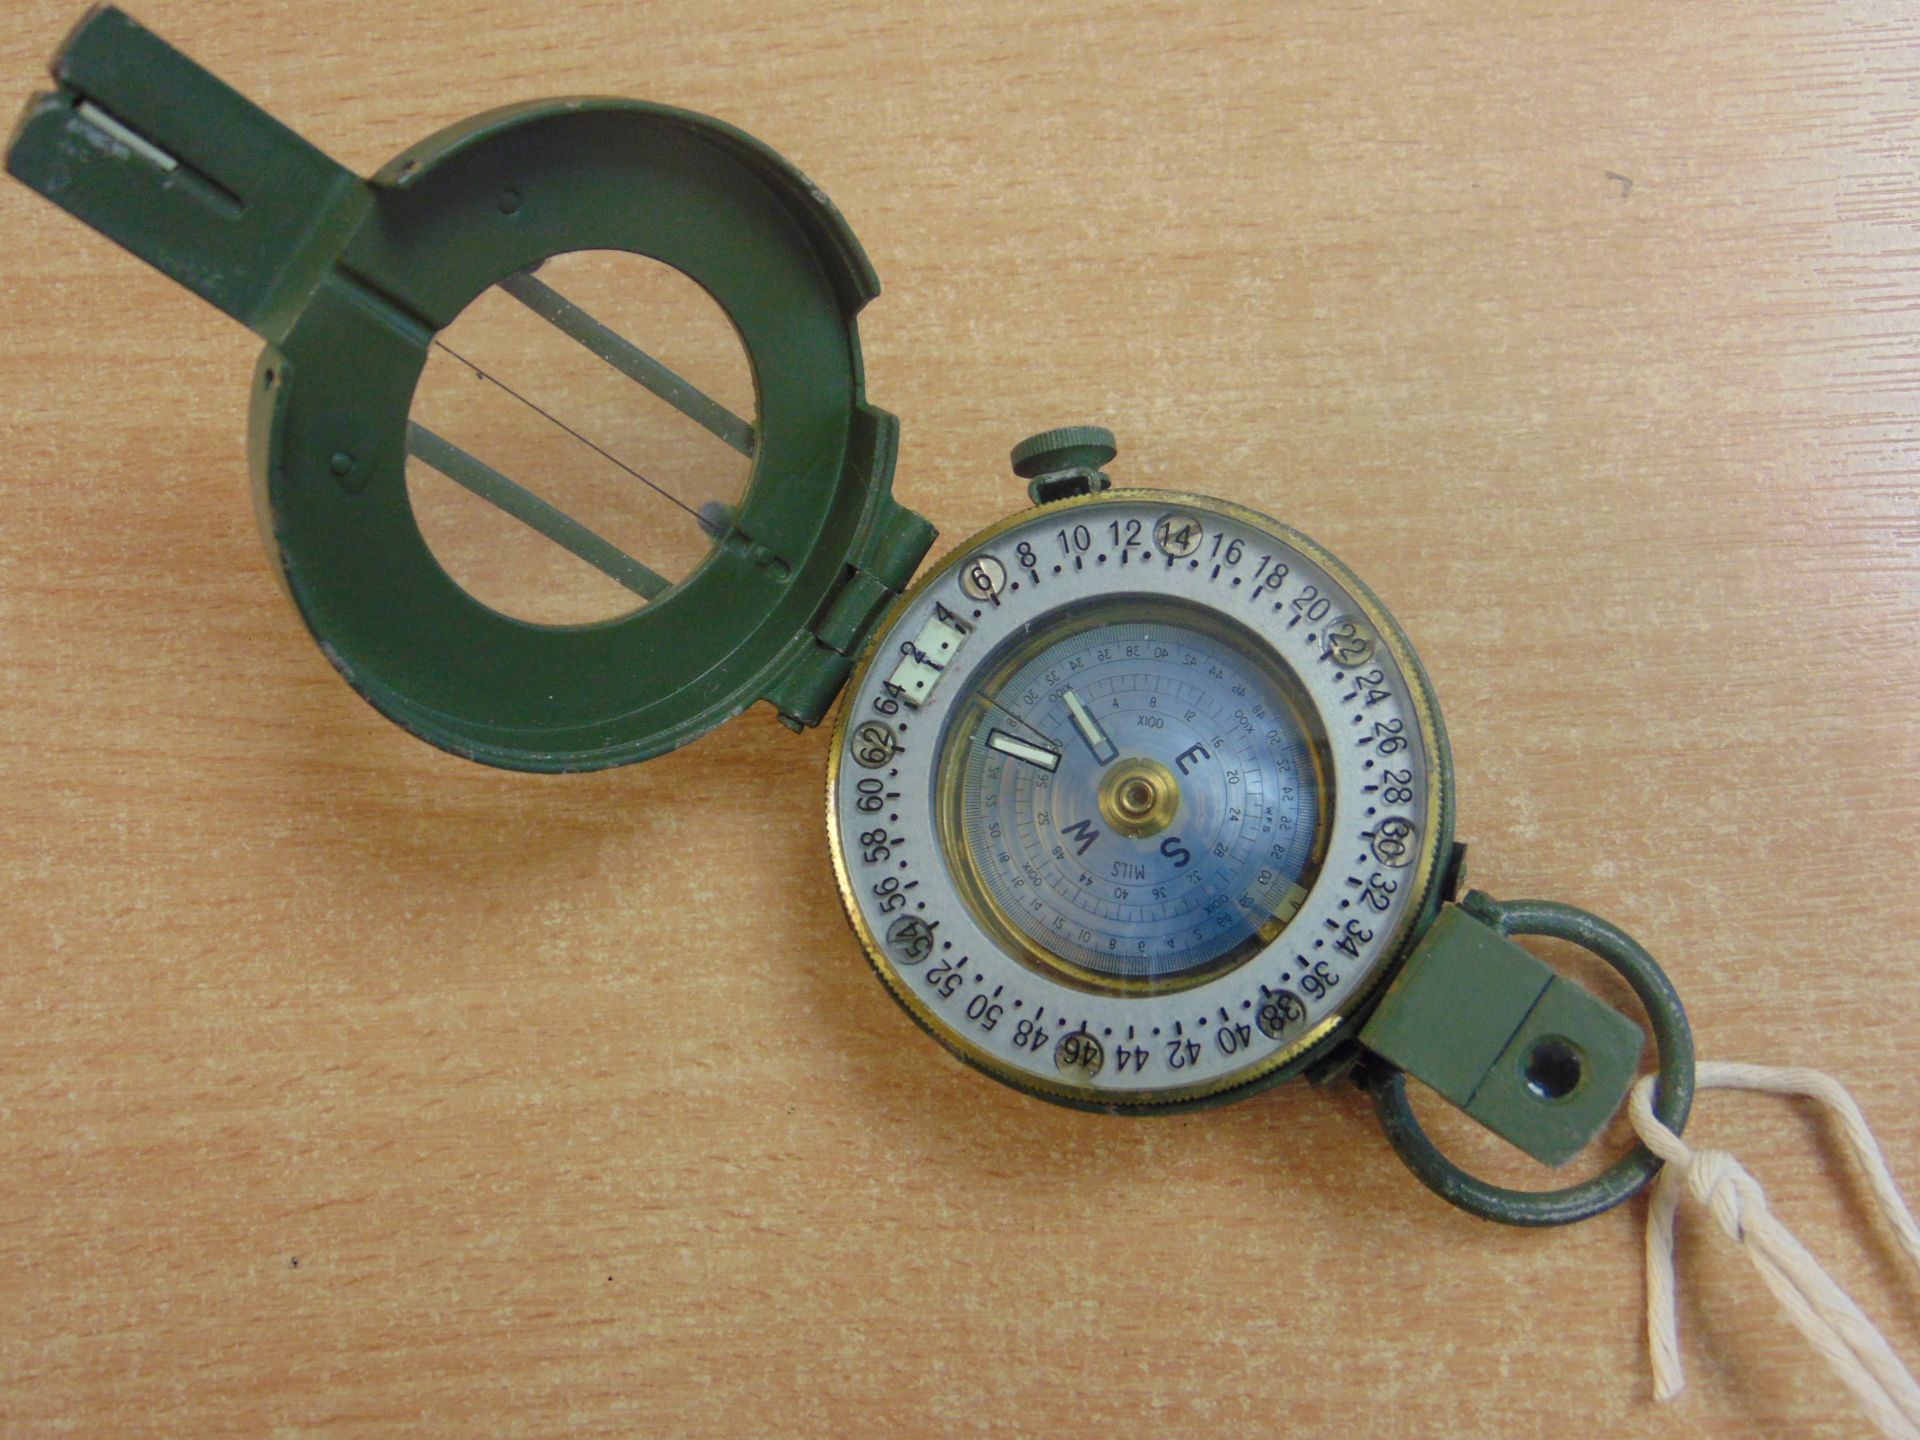 STANLEY LONDON BRASS PRISMATIC COMPASS BRITISH ARMY ISSUE NATO MARKS - Image 3 of 7